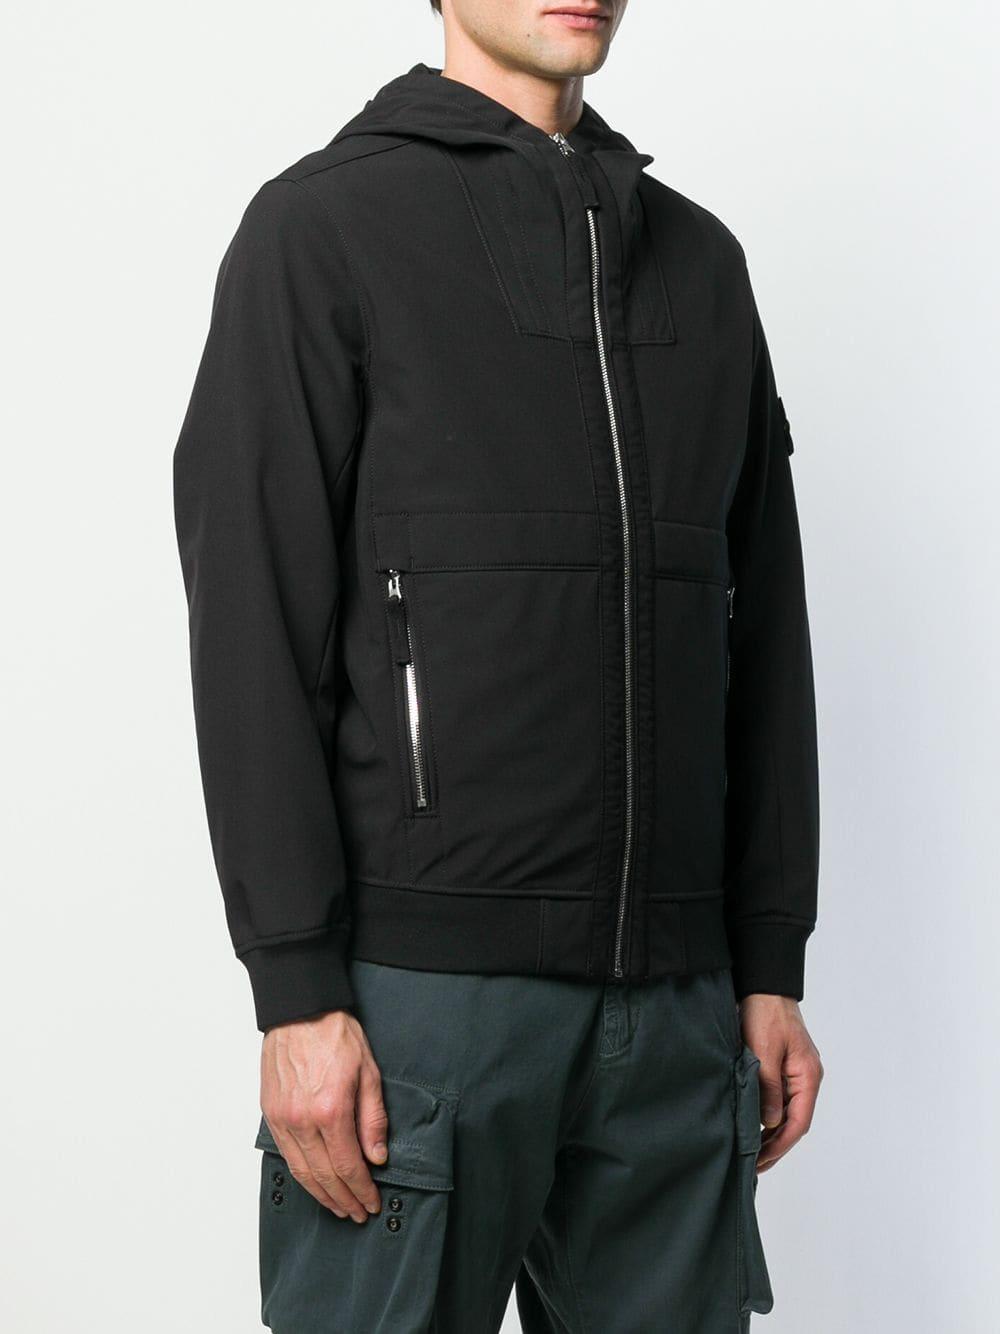 Stone Island Synthetic Hooded Bomber Jacket in Black for Men - Lyst